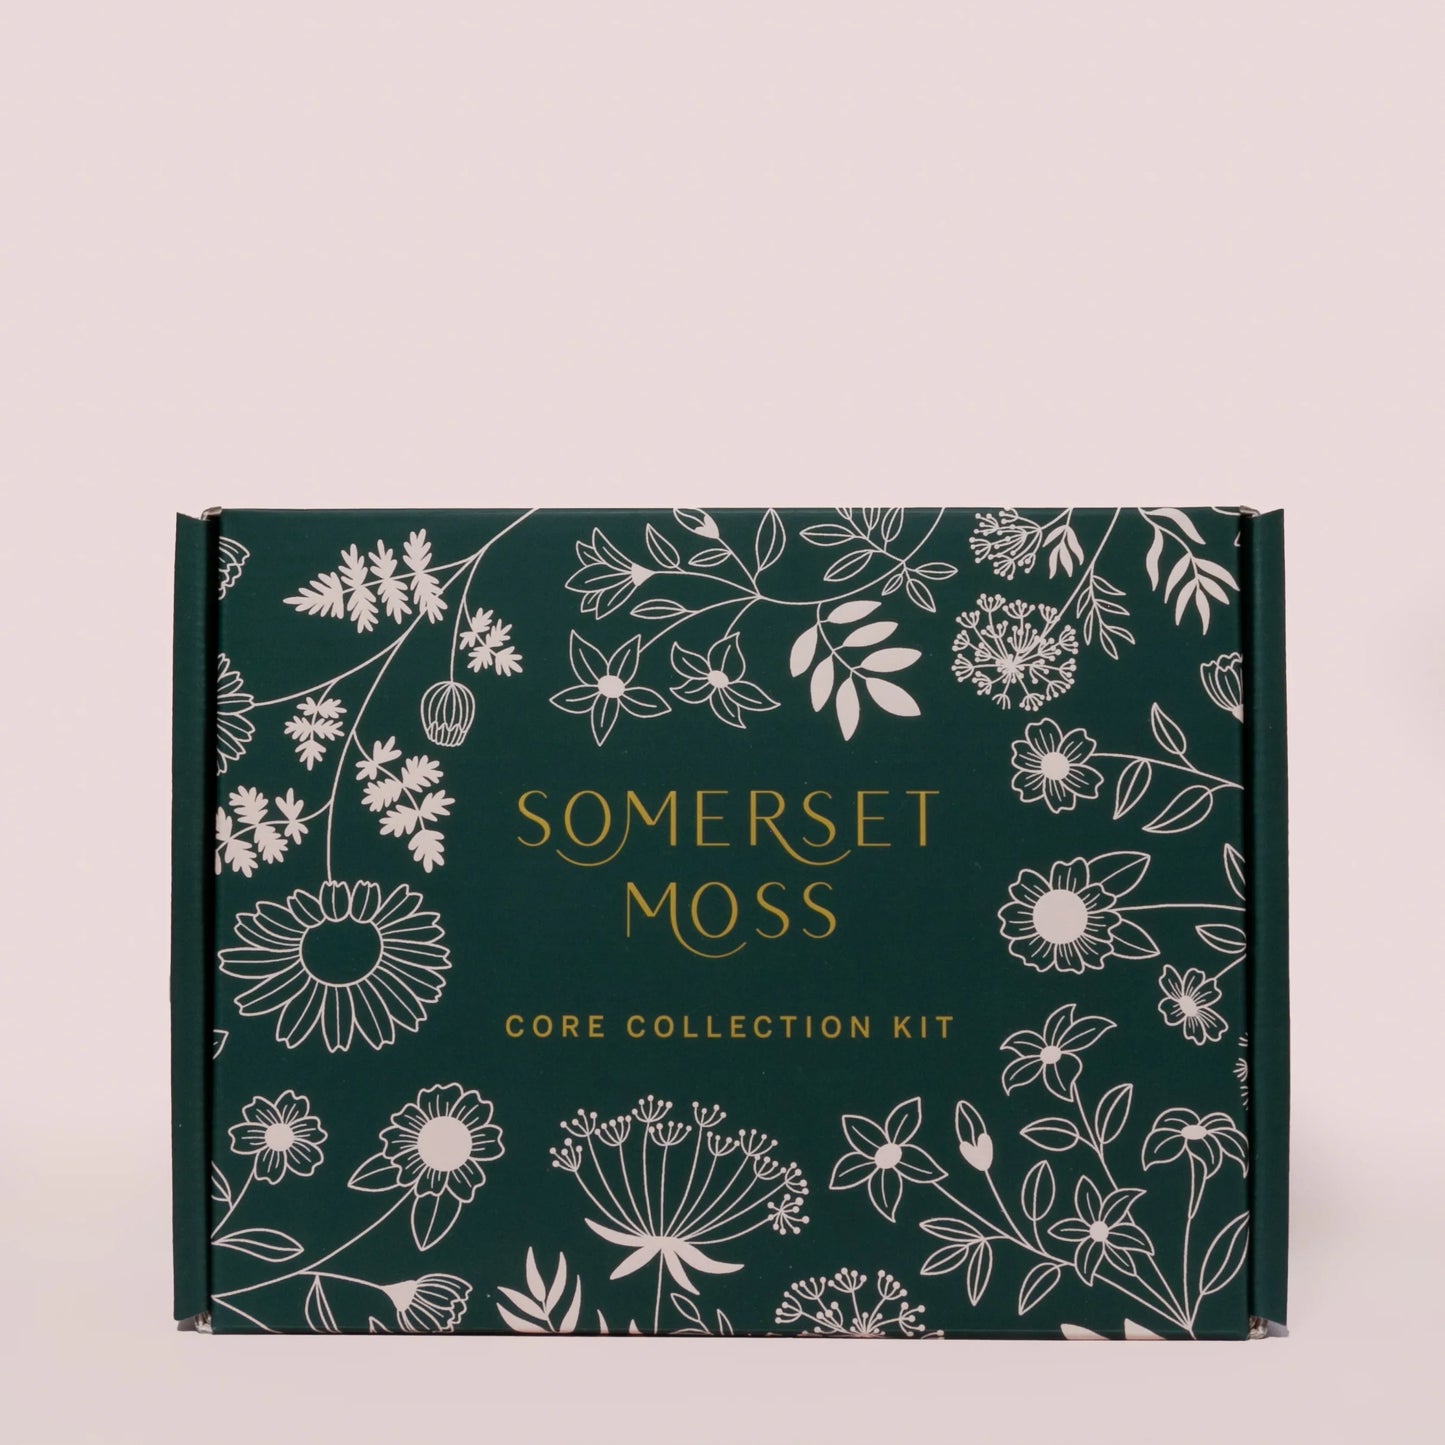 Core Collection Kit - Somerset Moss